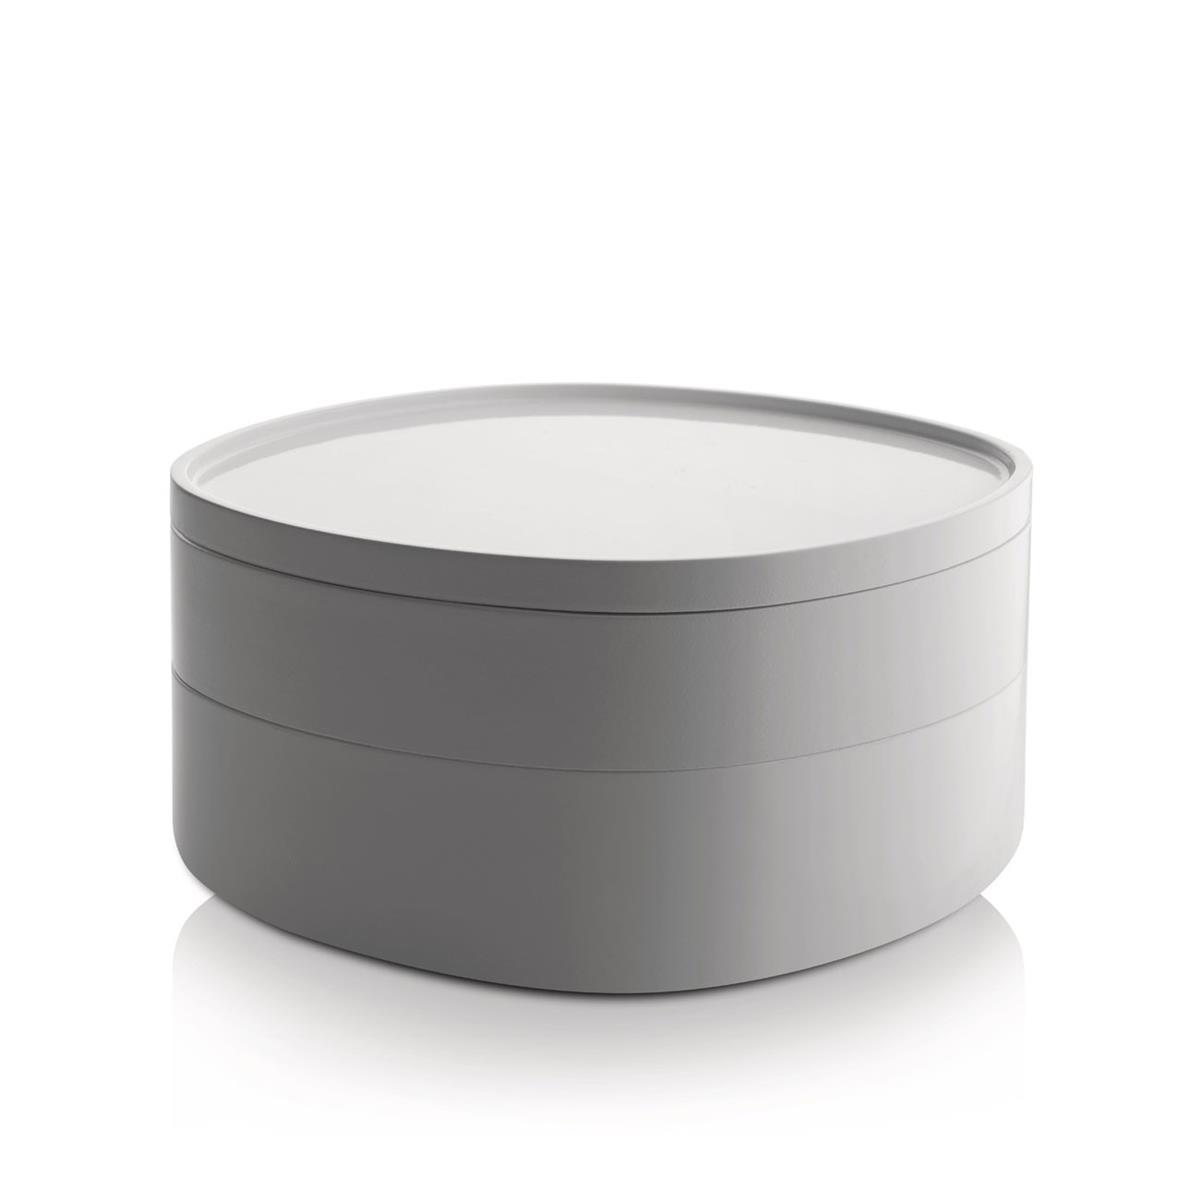 Alessi-Spirale Ashtray in 18/10 stainless steel mirror polished